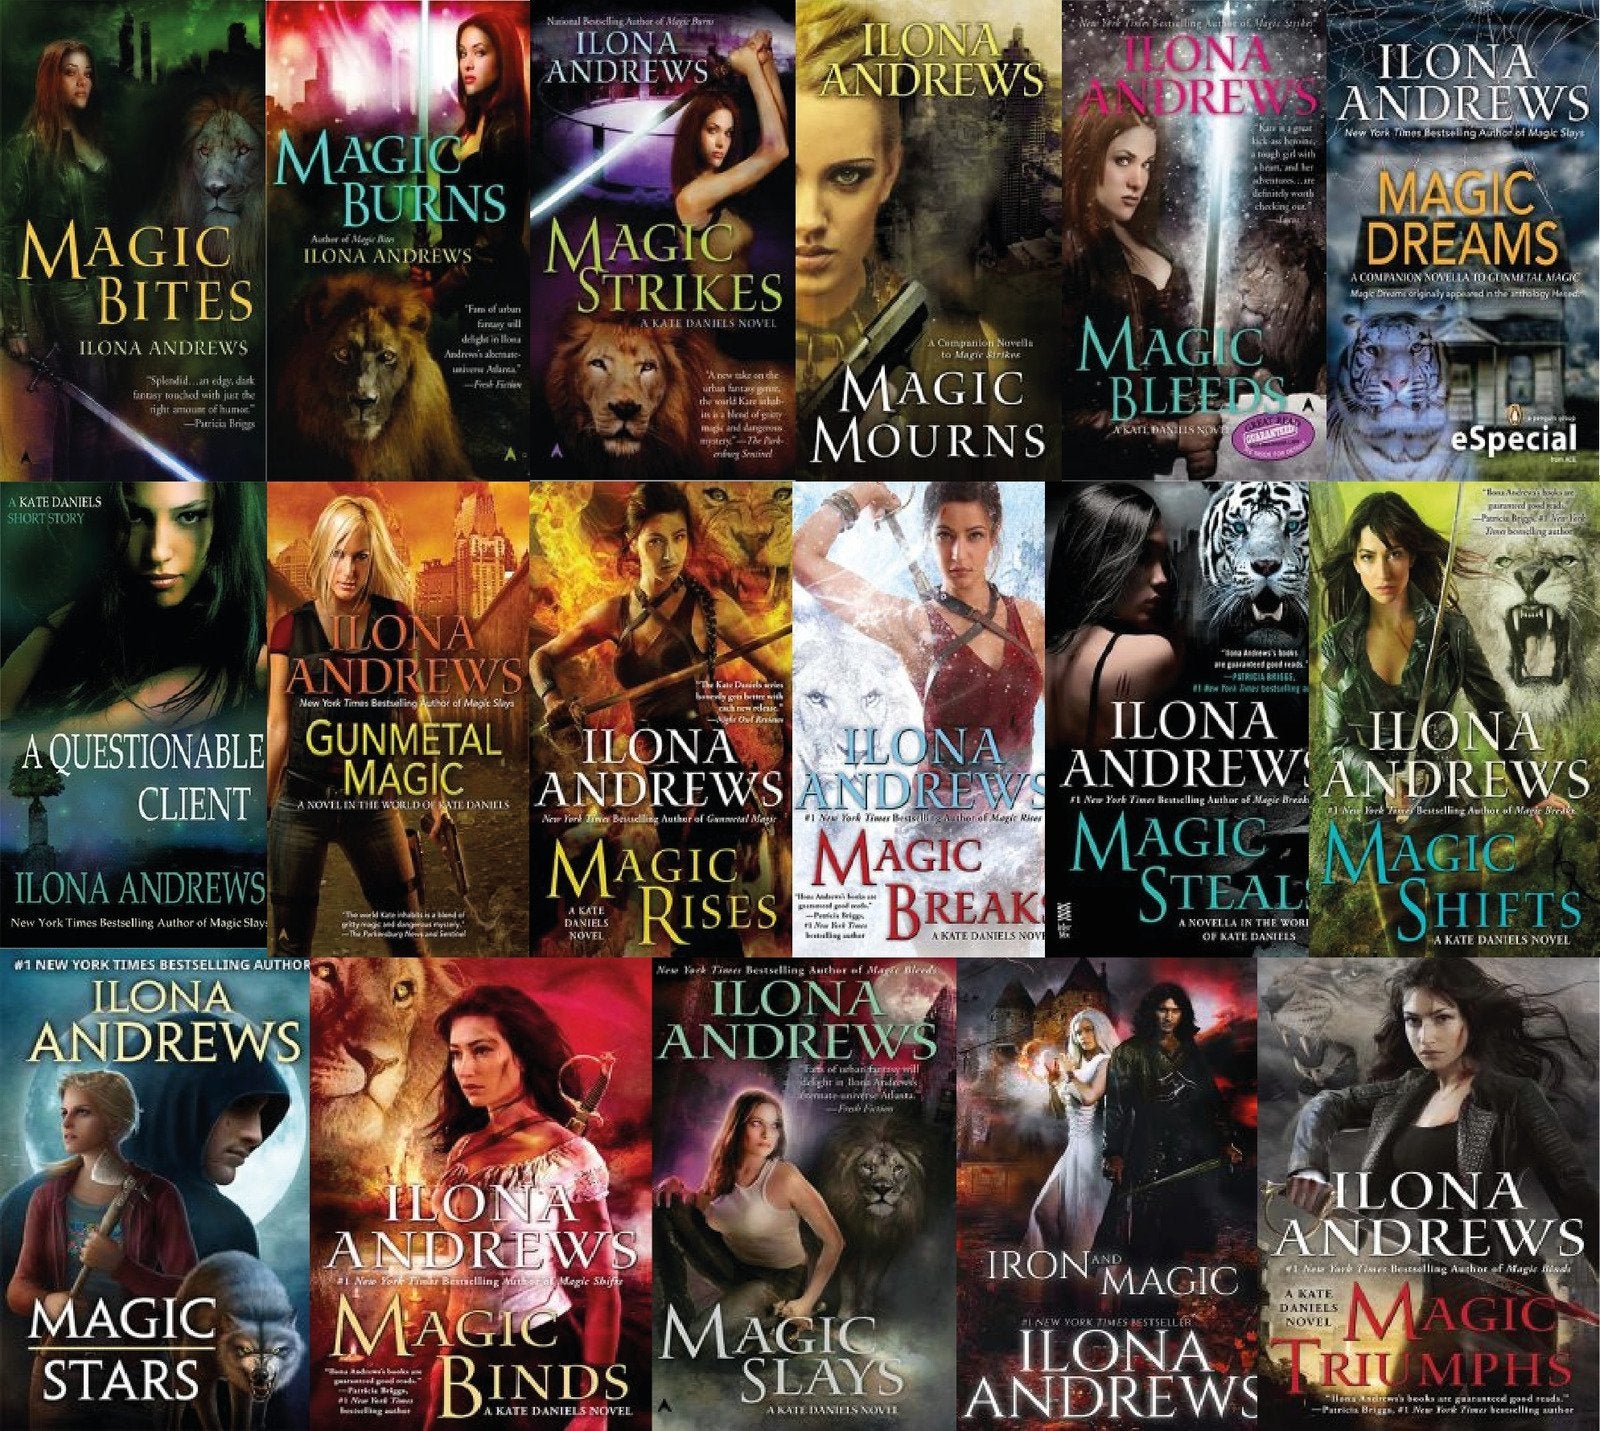 Listen Free to Magic Slays by Ilona Andrews with a Free Trial.